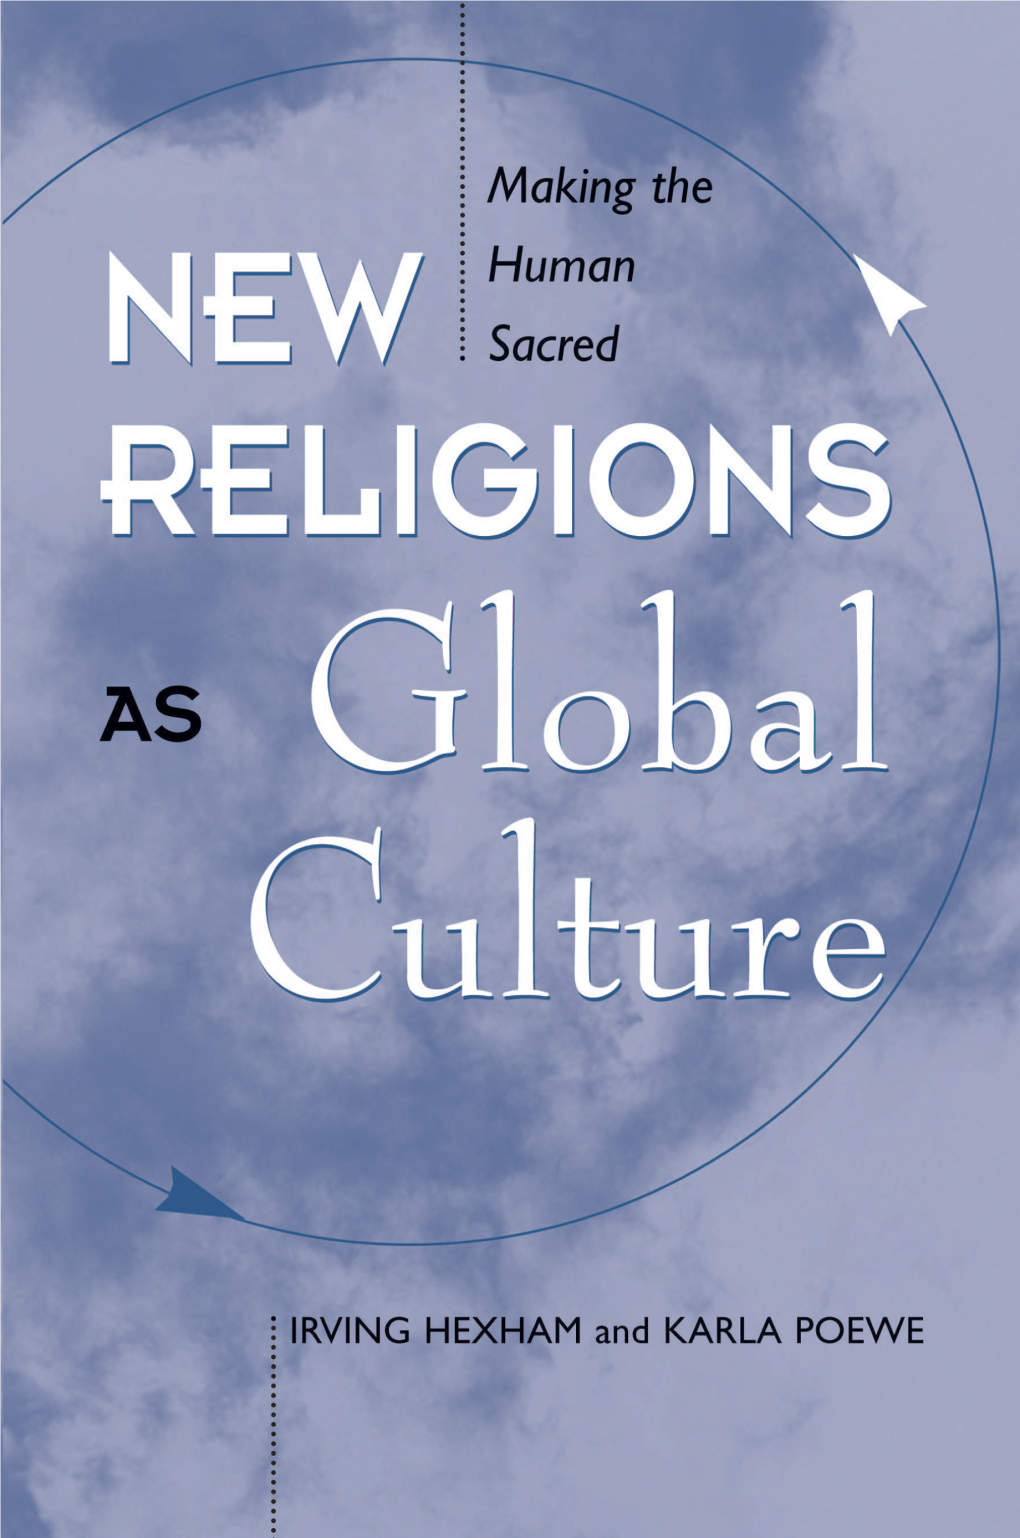 New Religions As Global Cultures: Making the Human Sacred